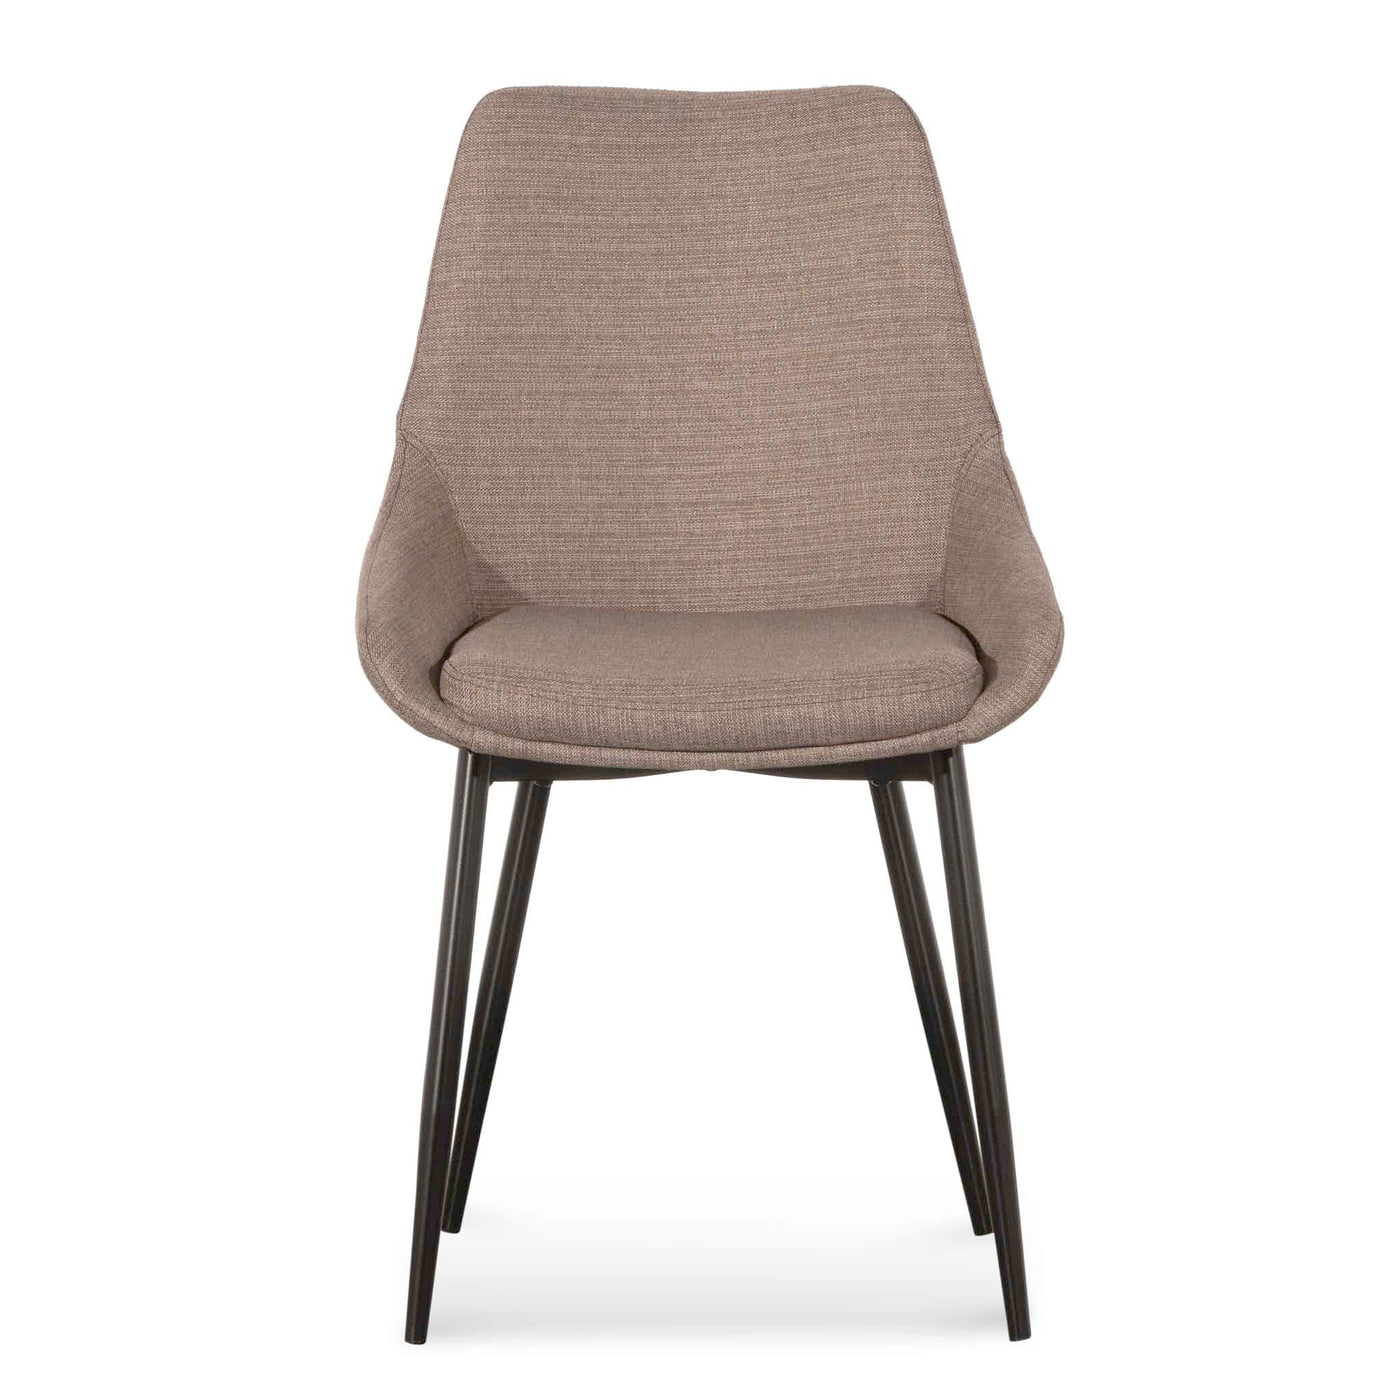 Dining Chair in Brown Grey (Set of 2)